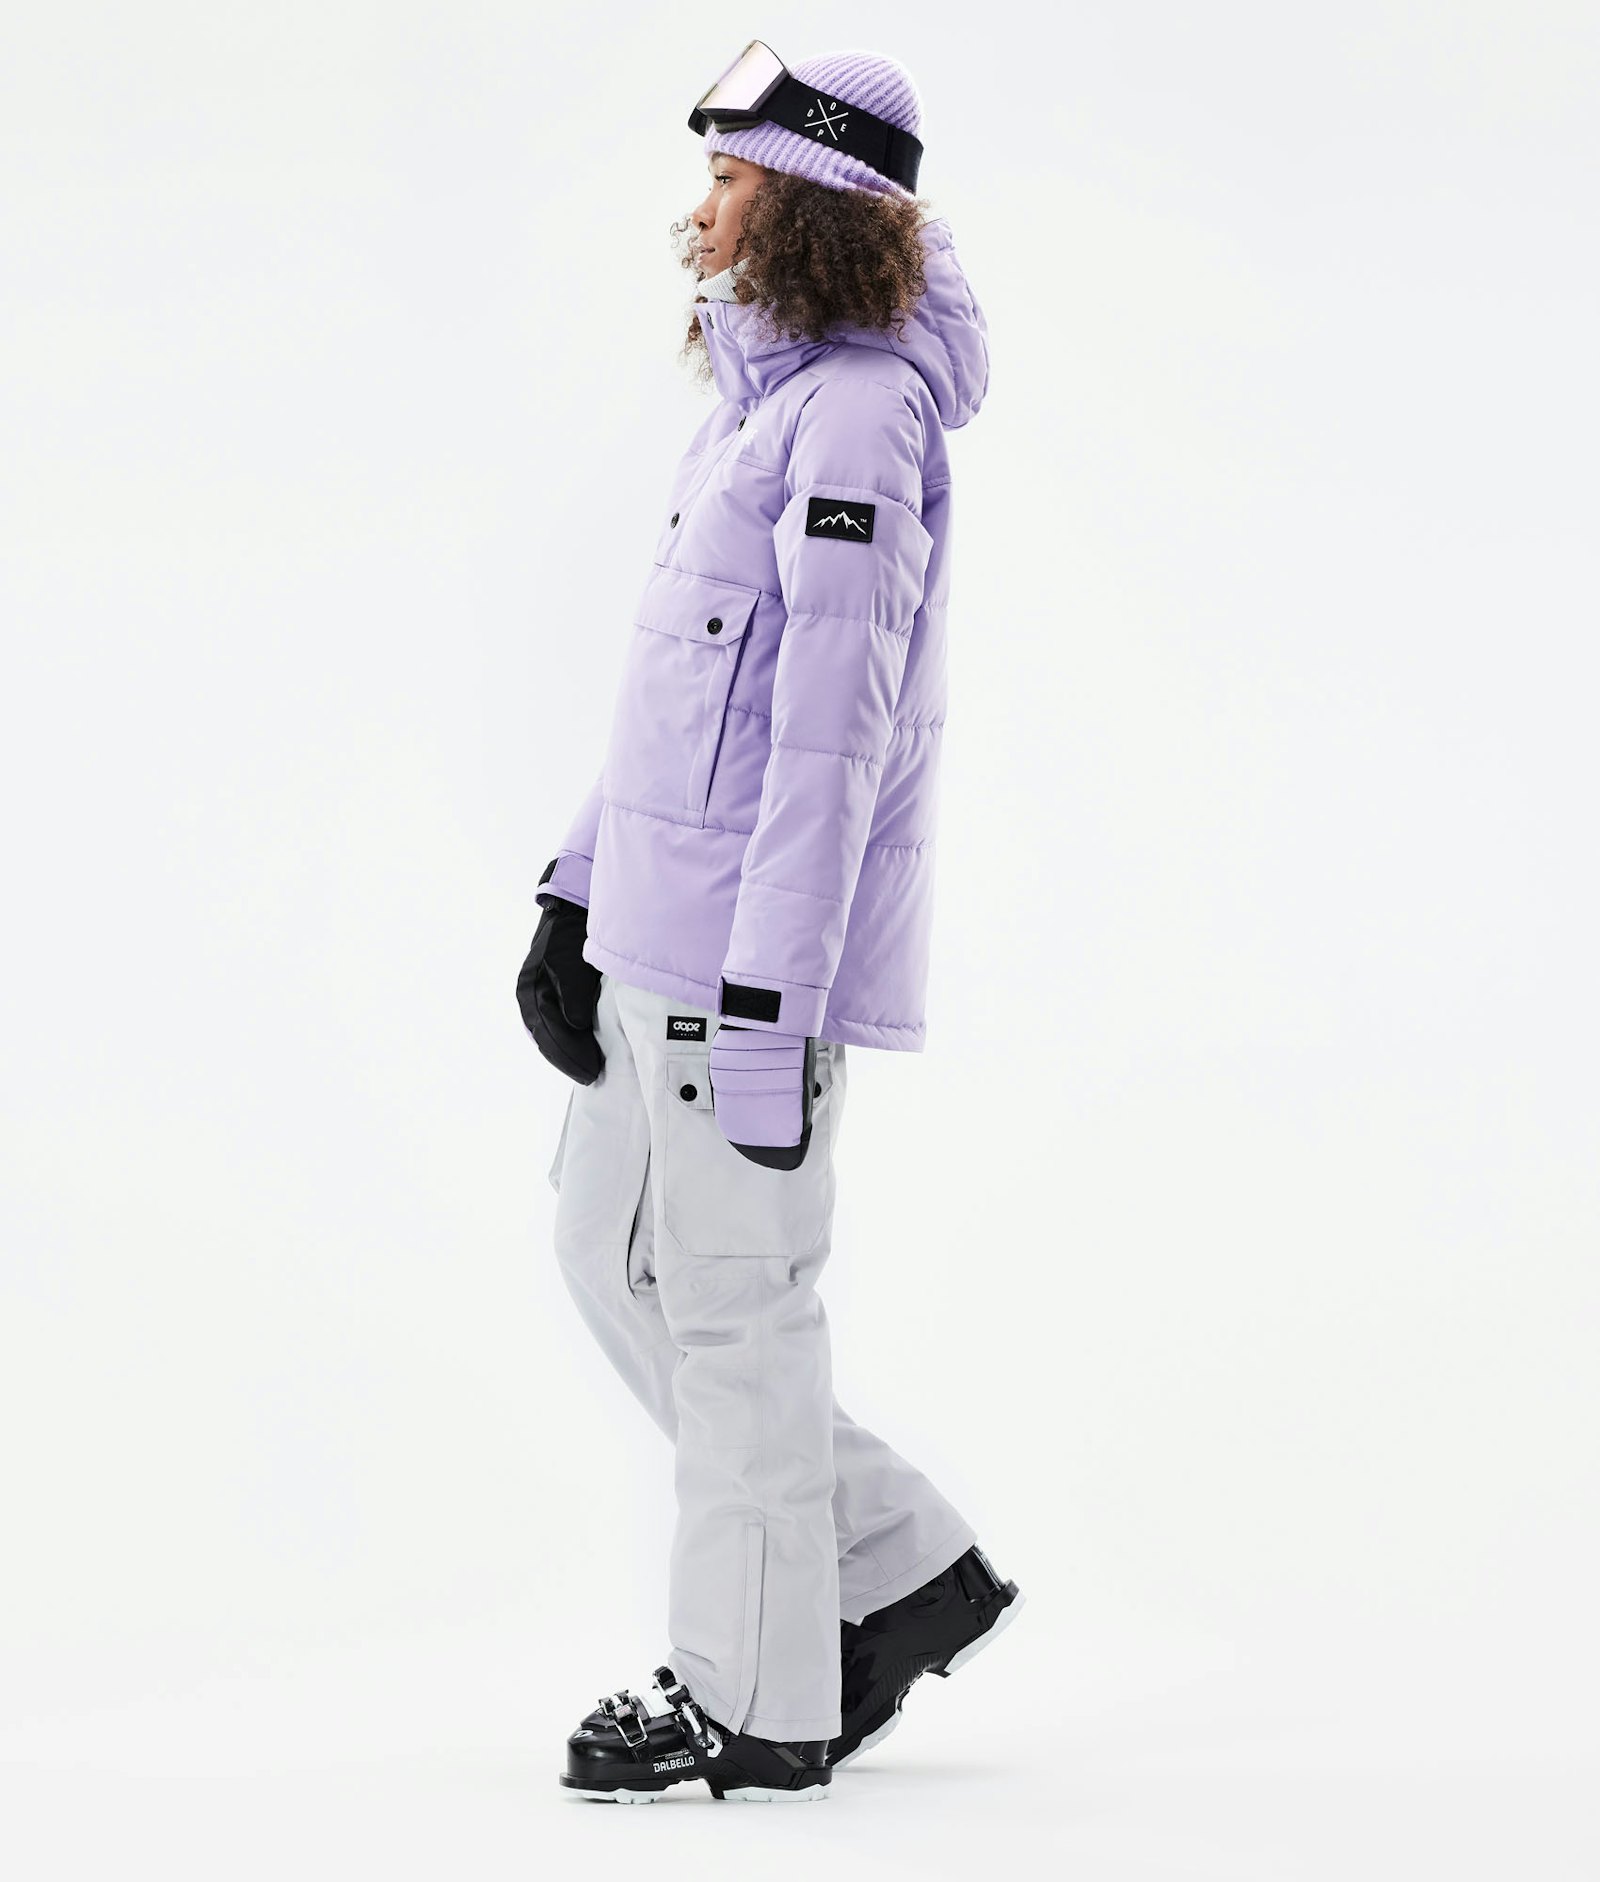 Dope Puffer W 2021 Chaqueta Esquí Mujer Faded Violet